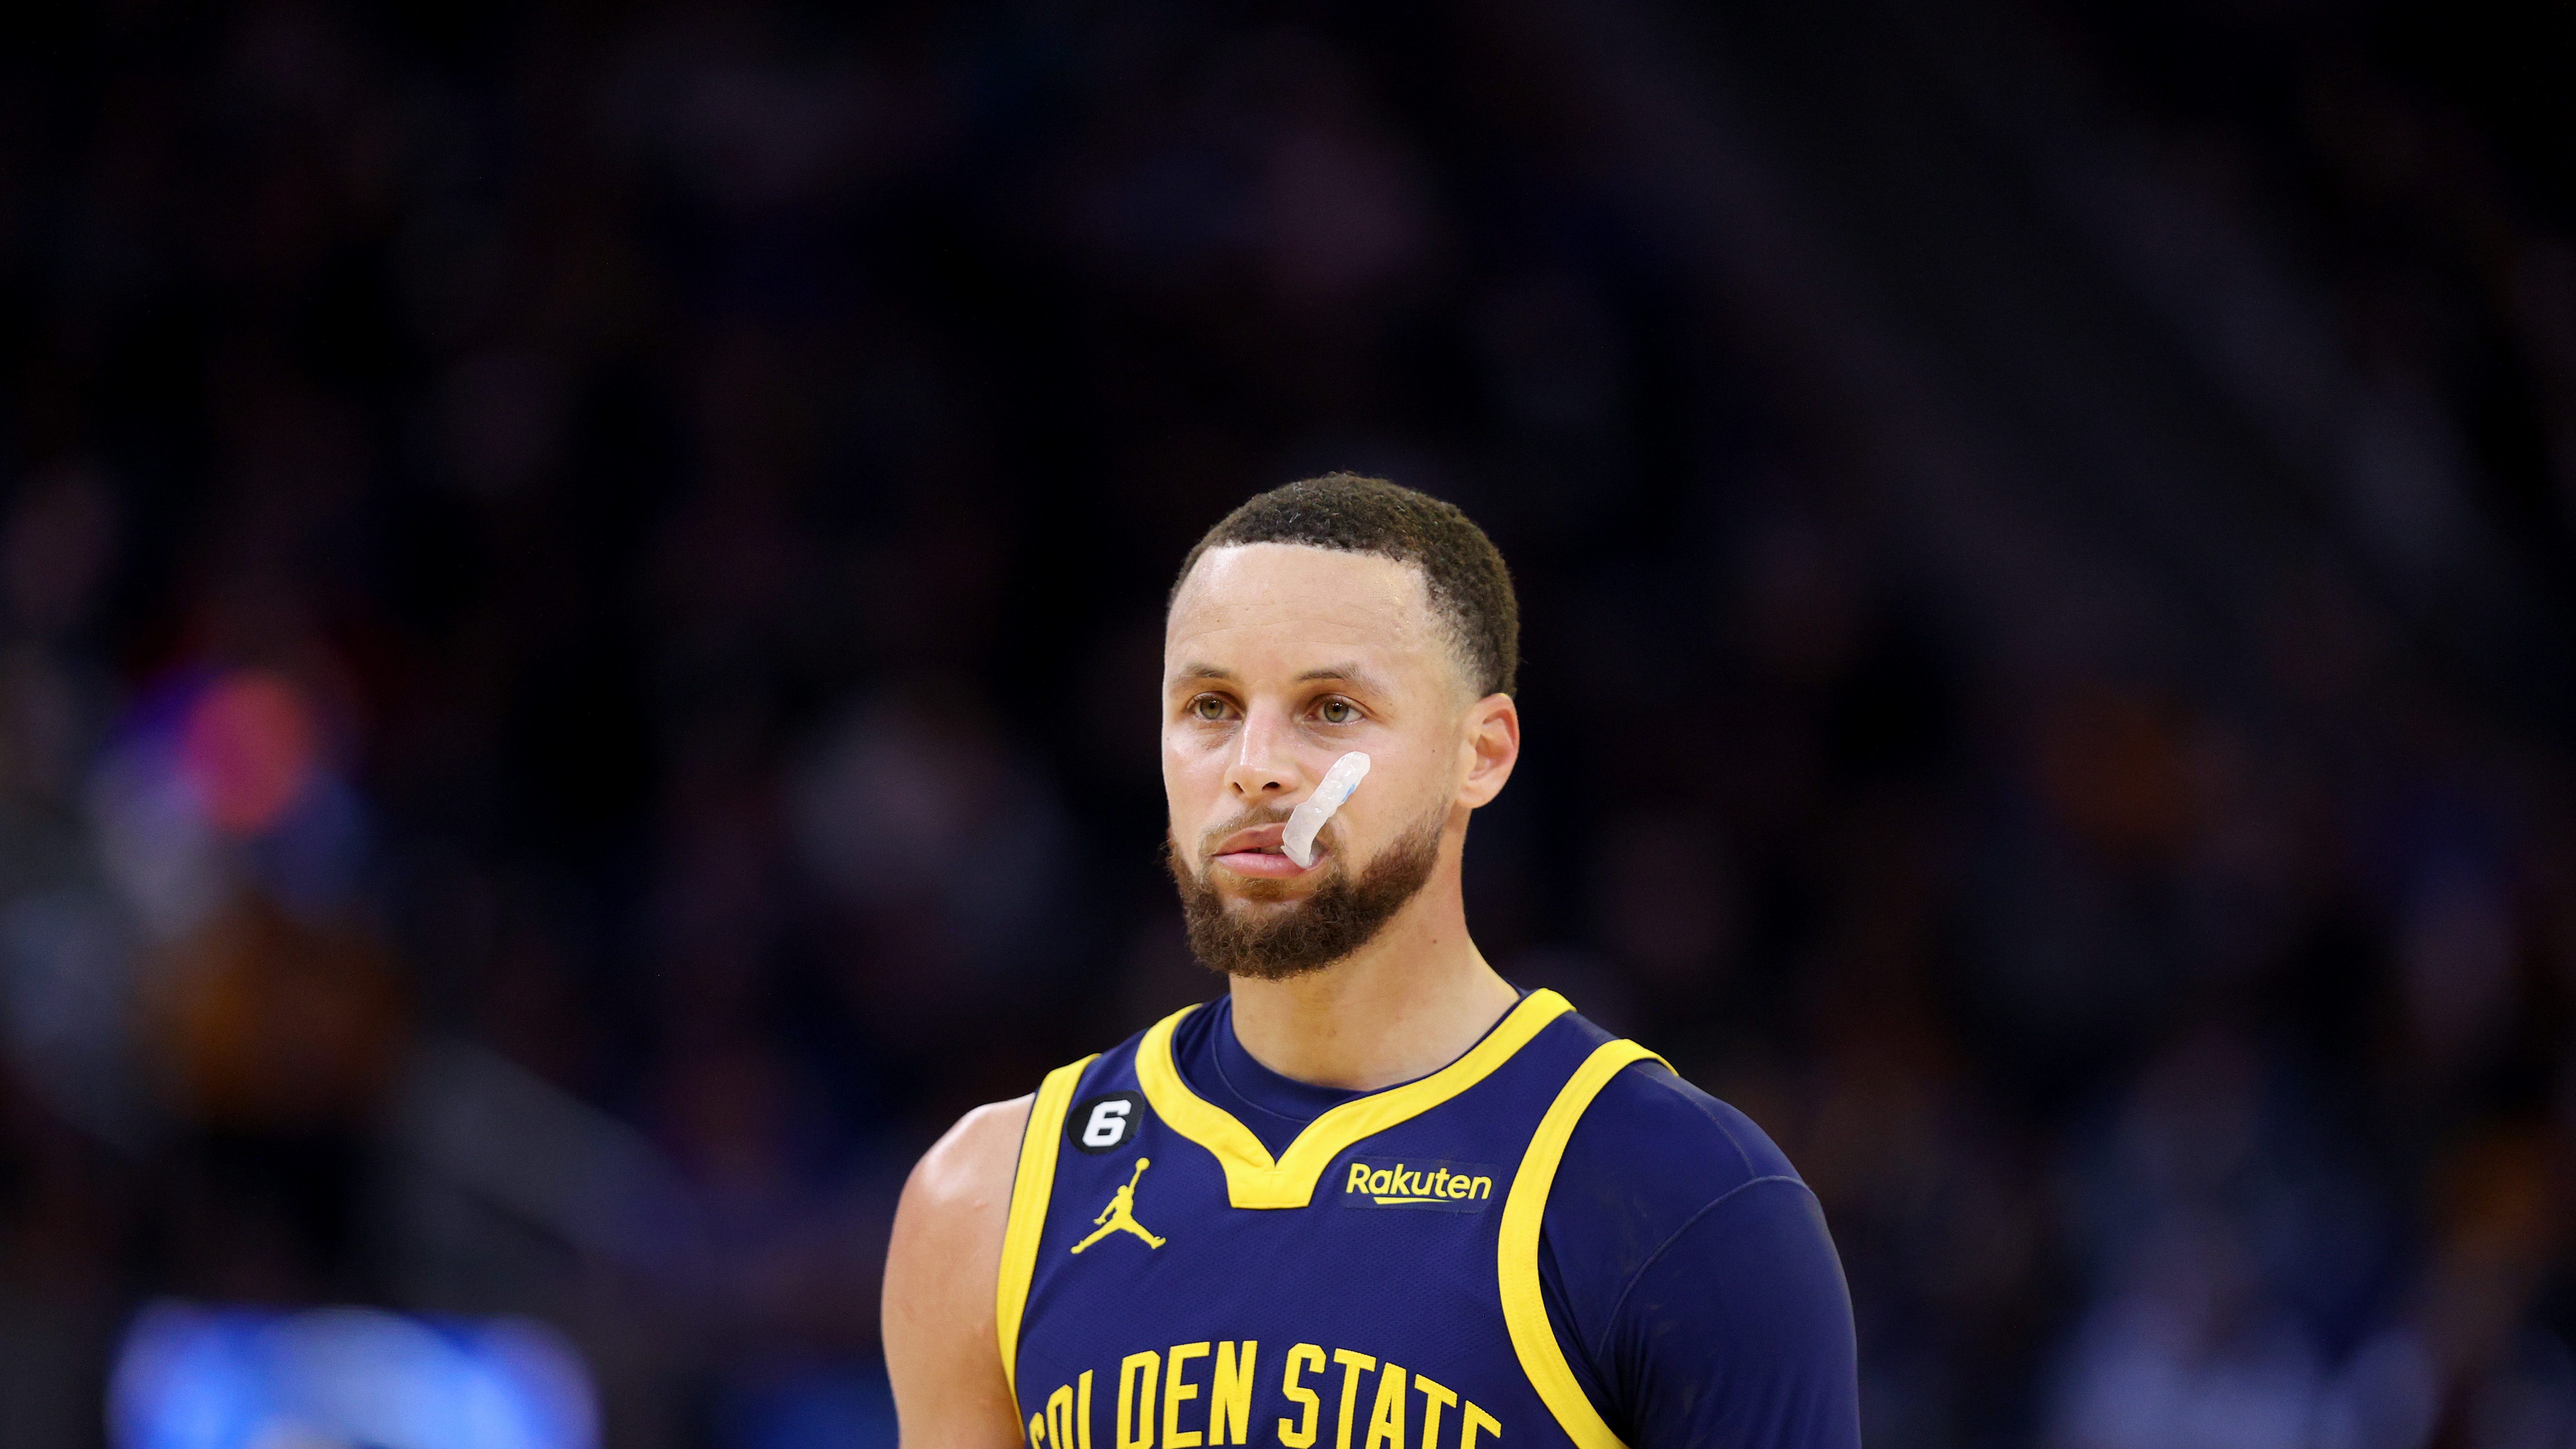 Warriors Steph Curry wins player of the week after amazing